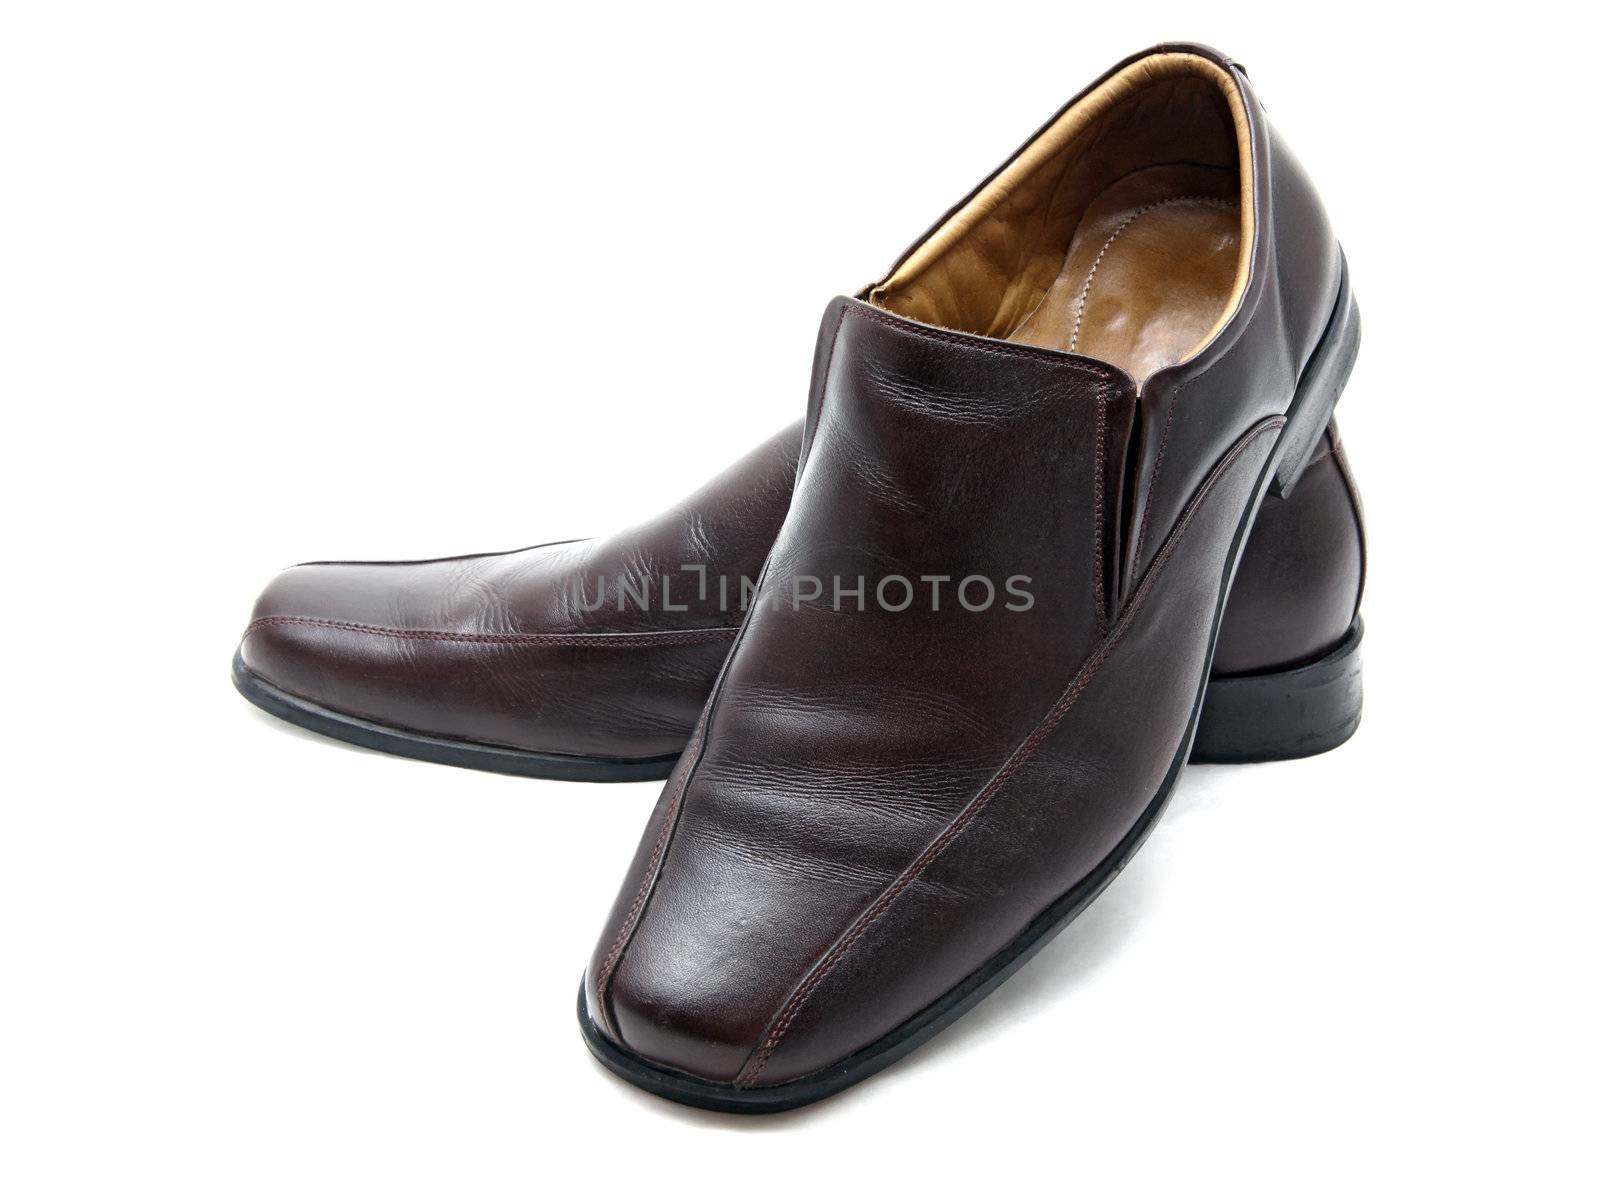 luxury brown leather man shoes on a white background